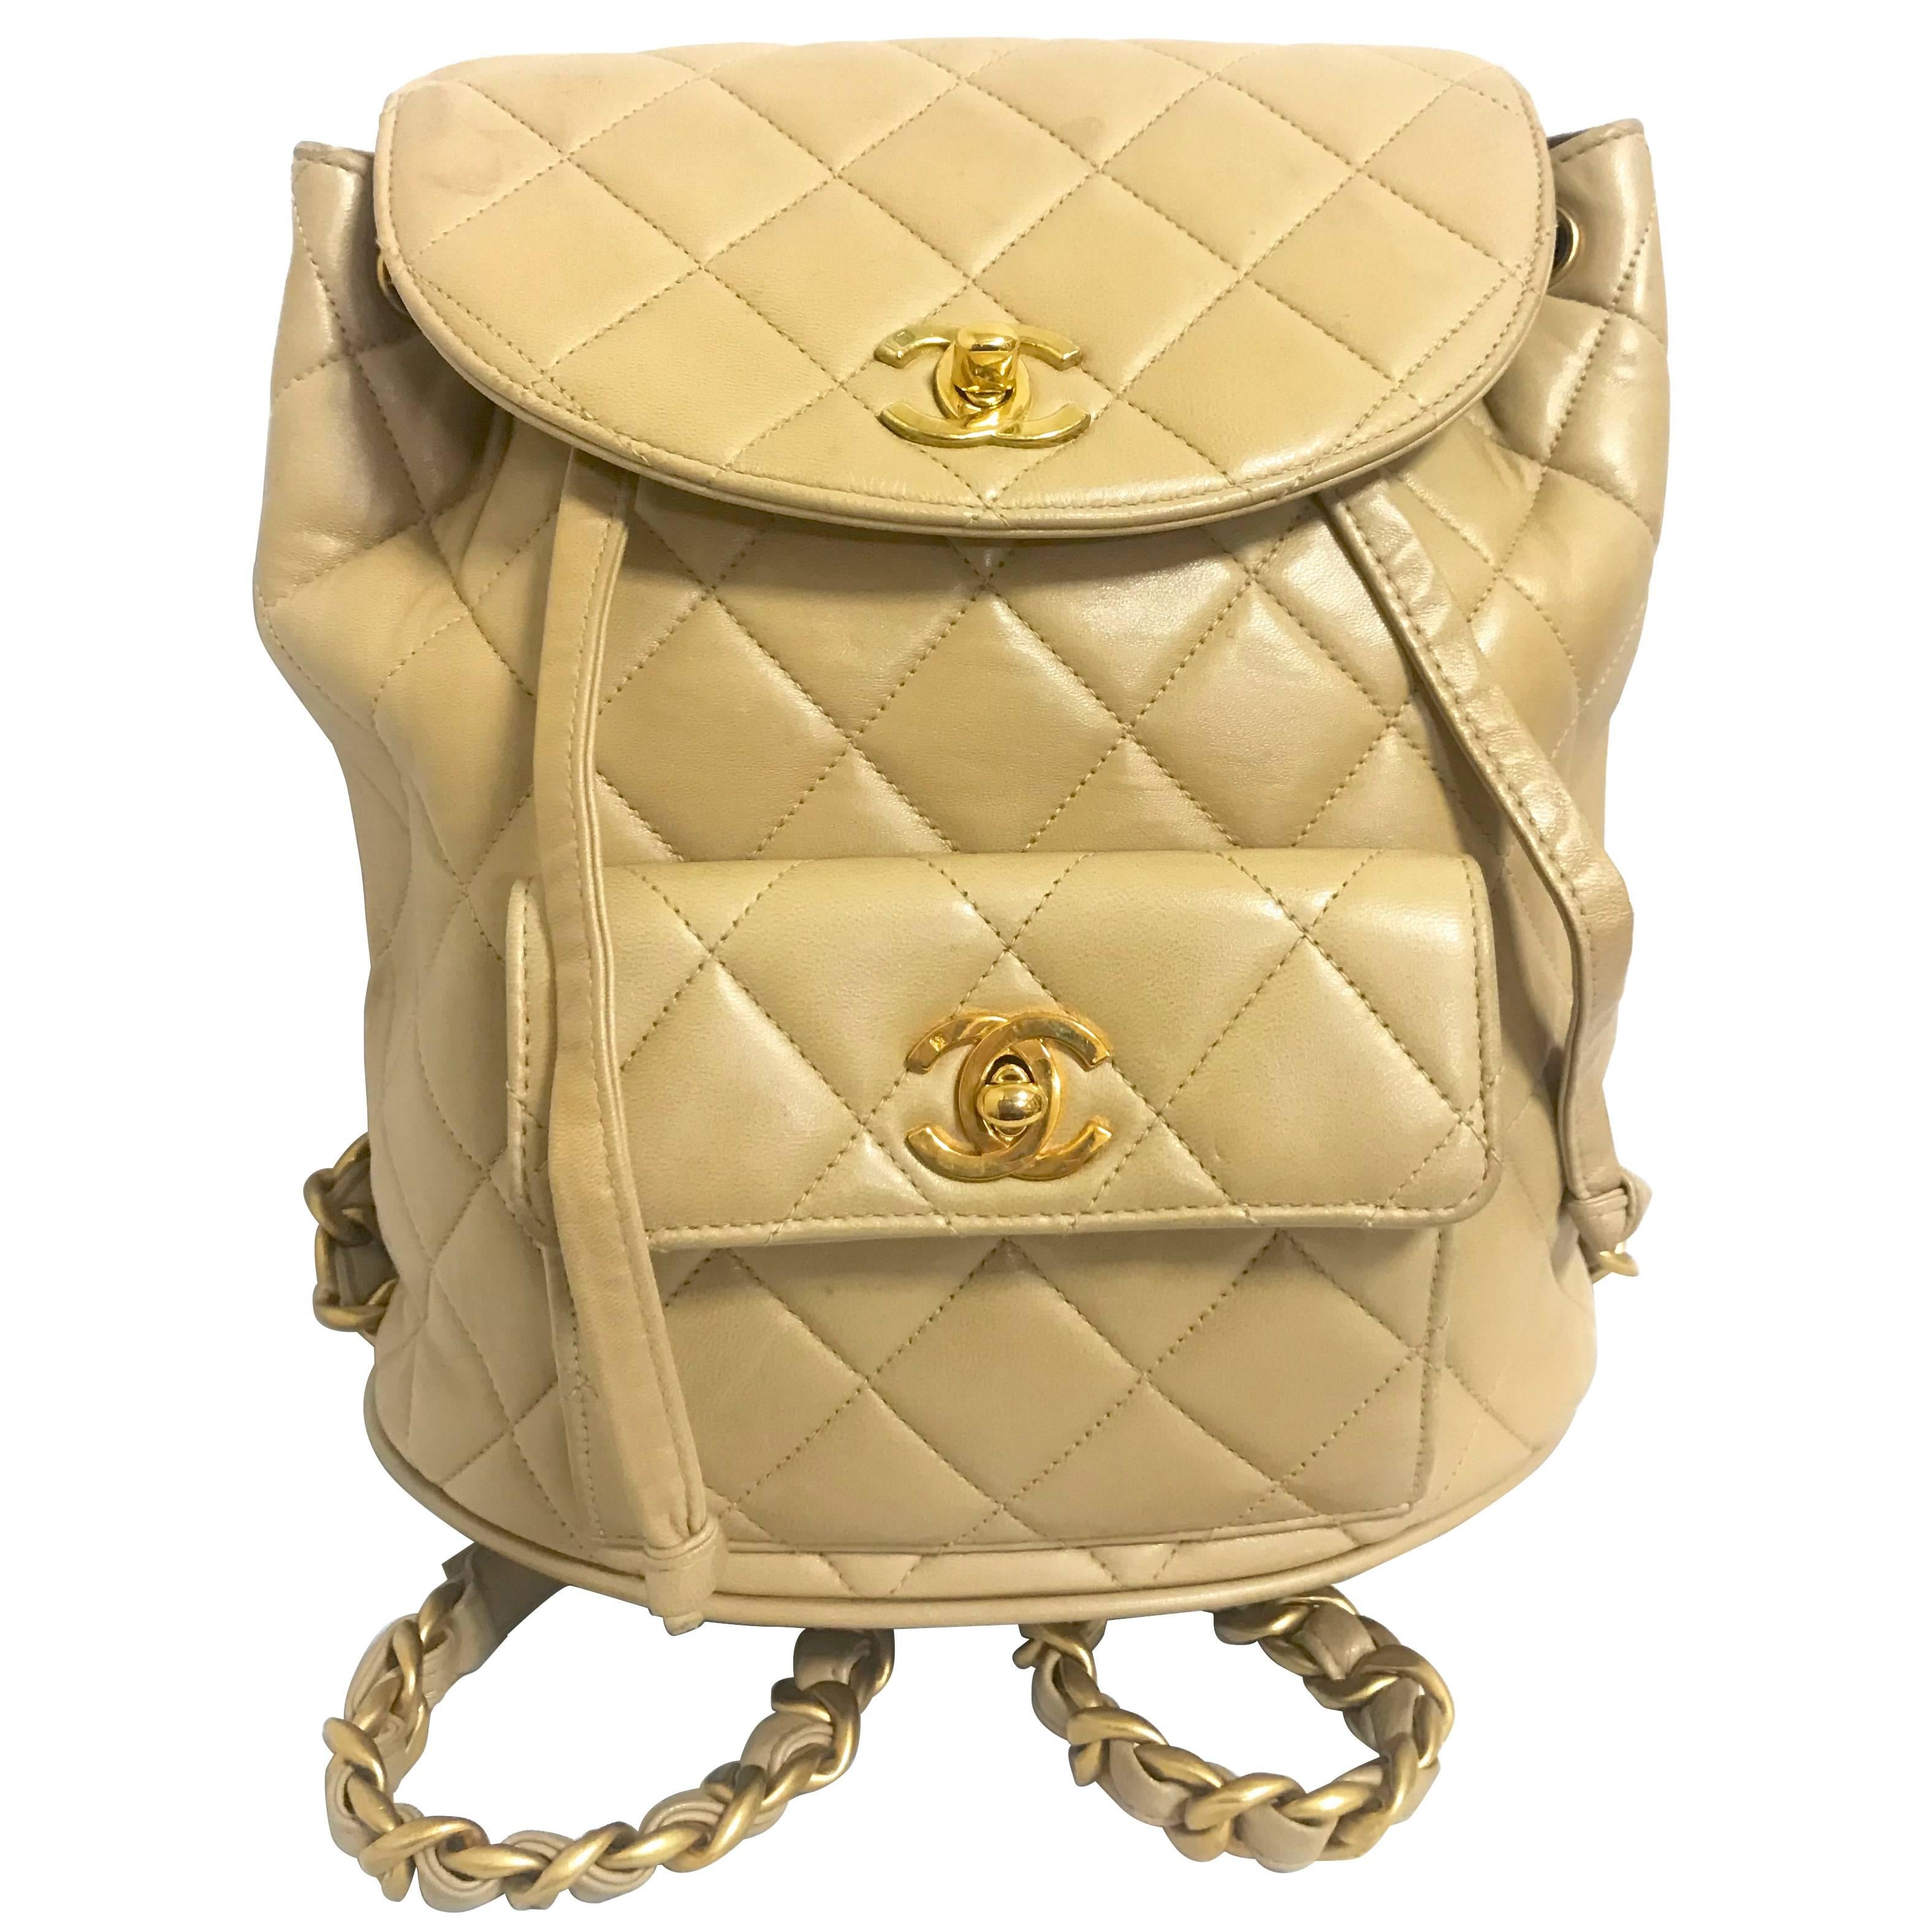 Chanel Vintage classic beige lamb leather 2.55 backpack with golden CC and chain